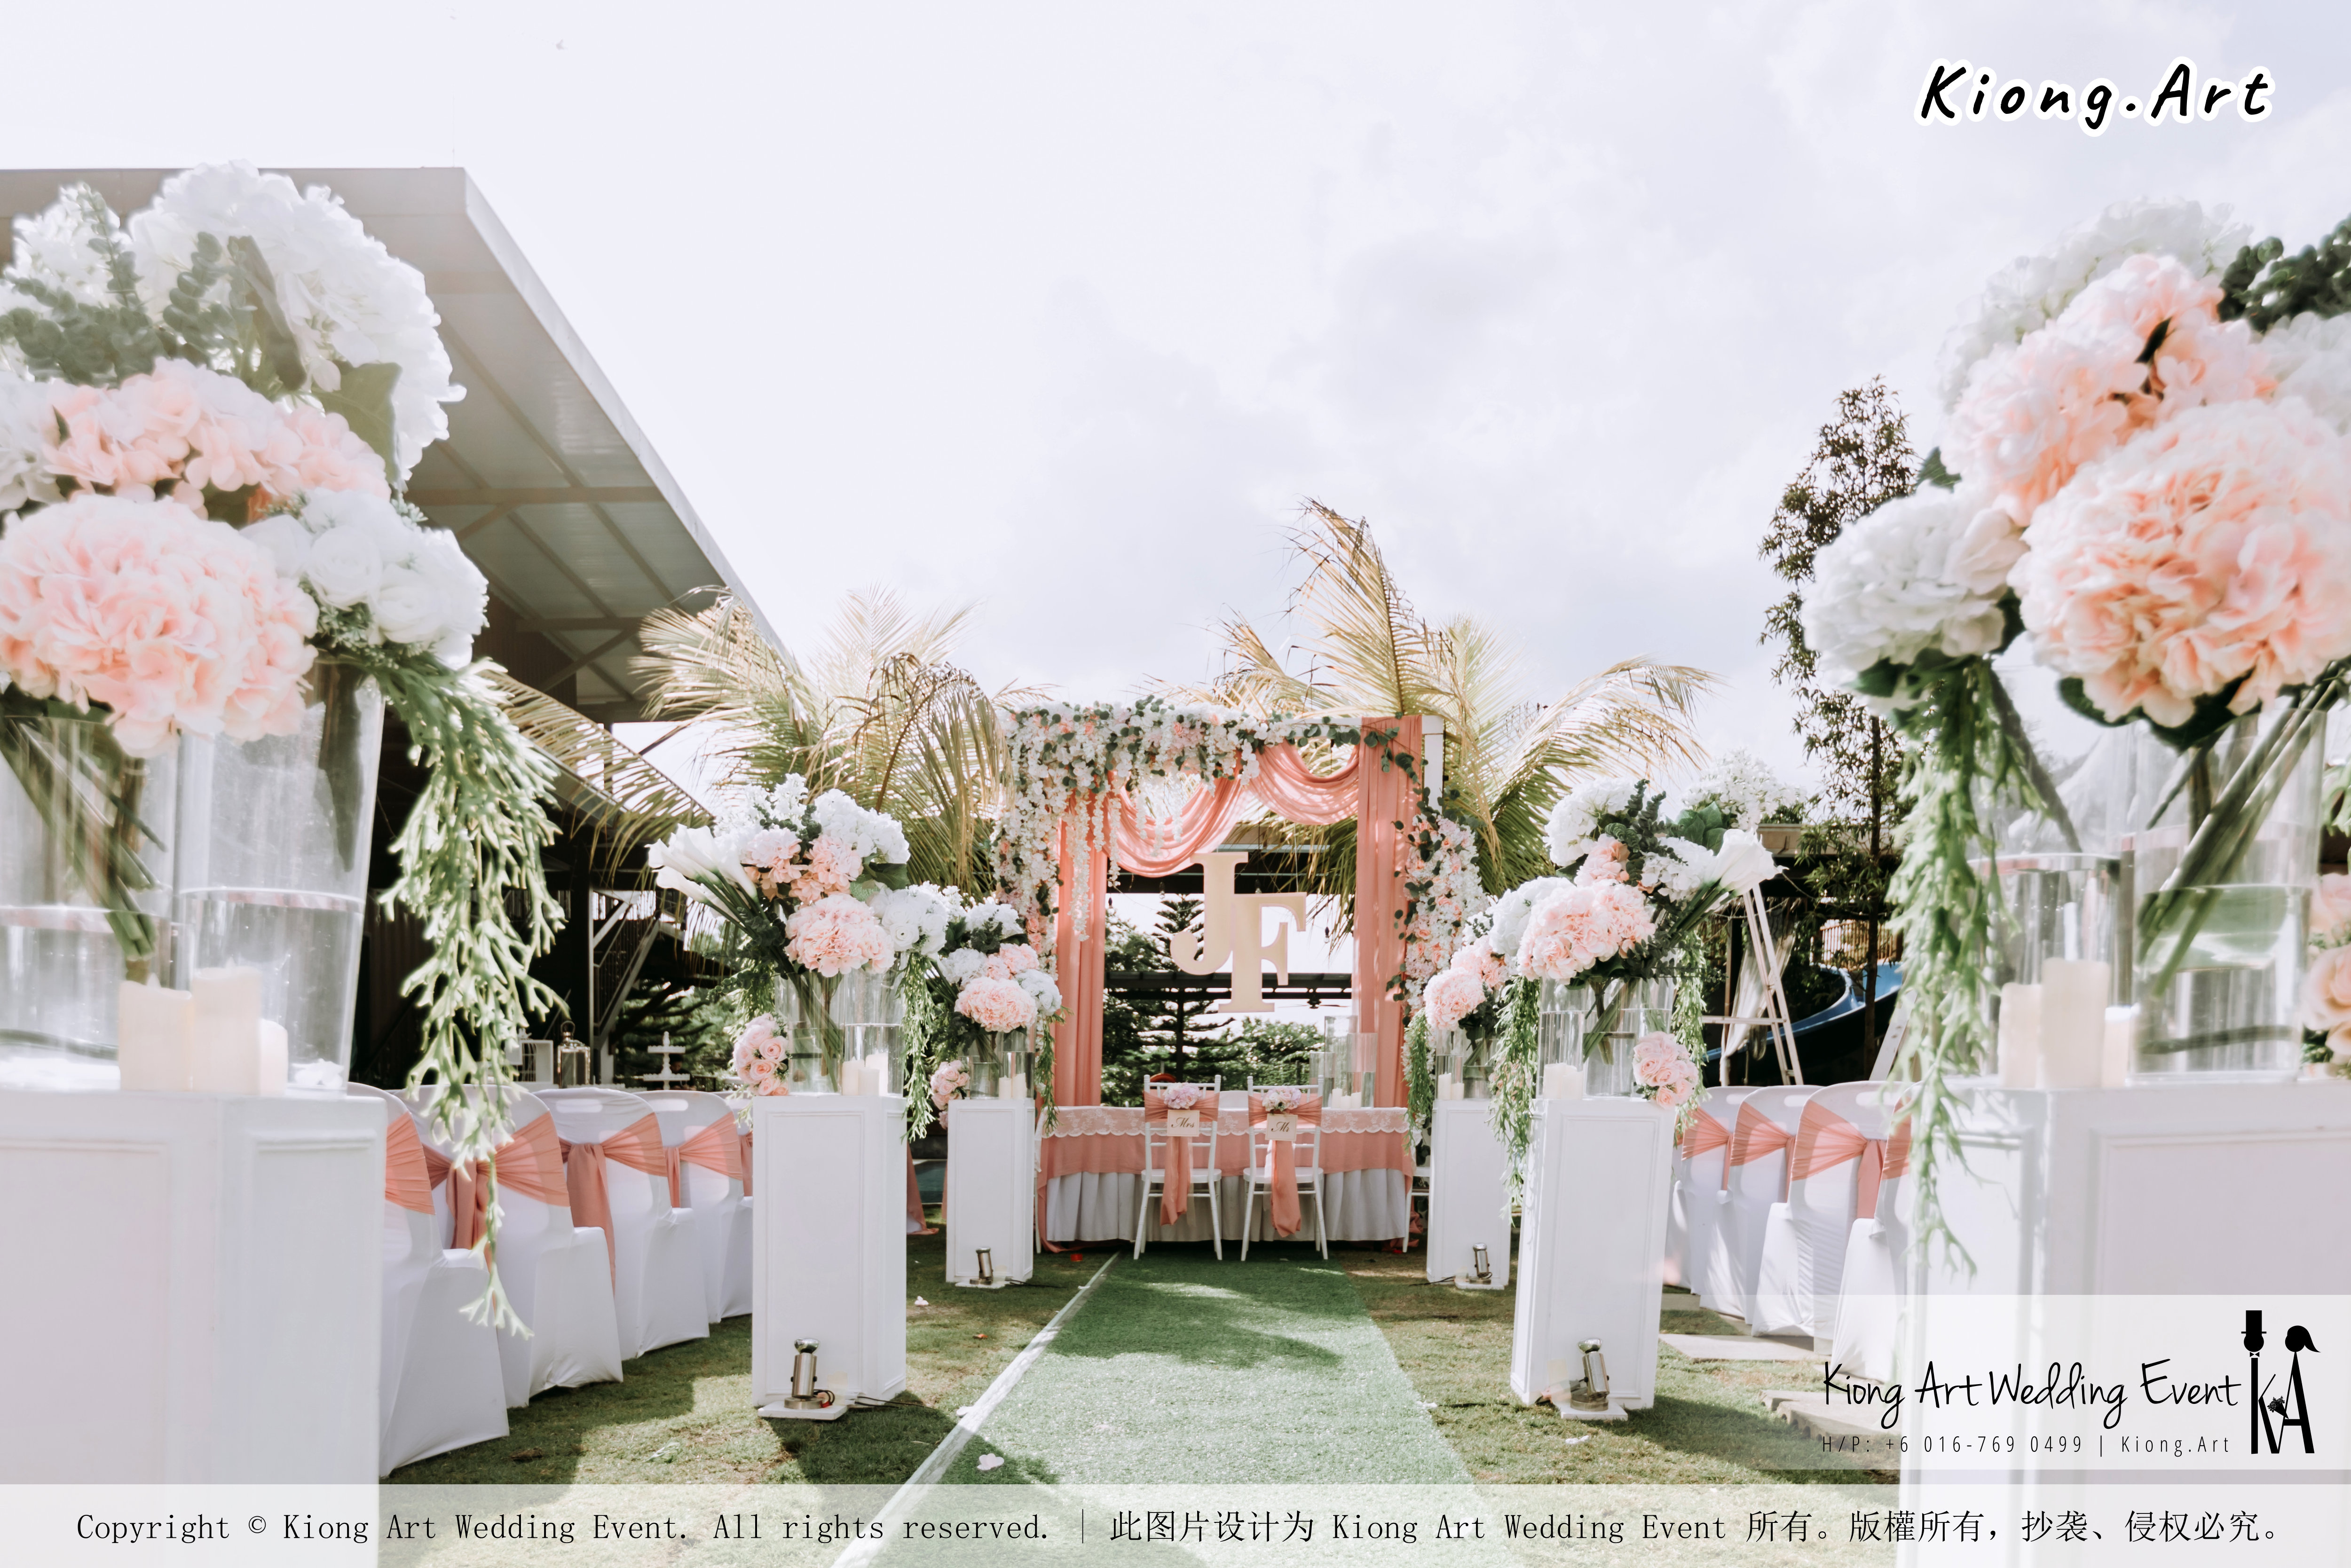 Malaysia Kuala Lumpur Wedding Decoration Kiong Art Wedding Deco Eternal Registration of Marriage Ceremony Open-air Party of Jack and Fish ROM at Kluang Container Hotel A14-A01-015